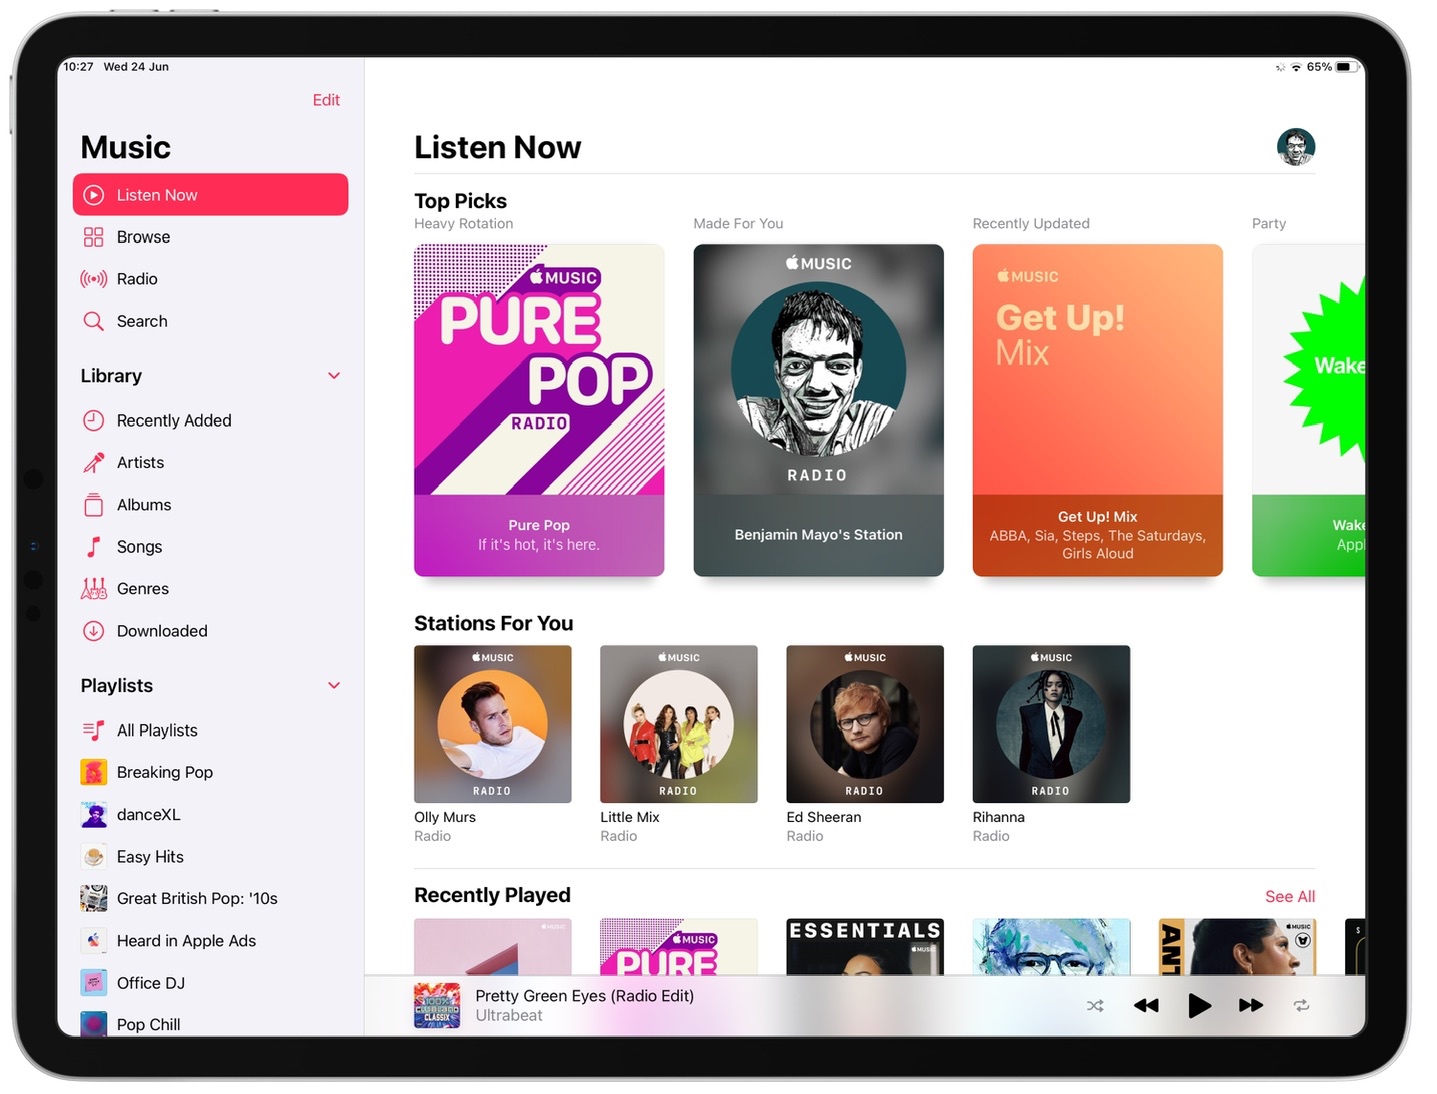 Whats New In The Apple Music App For Ios 14 Listen Now Tab Endless